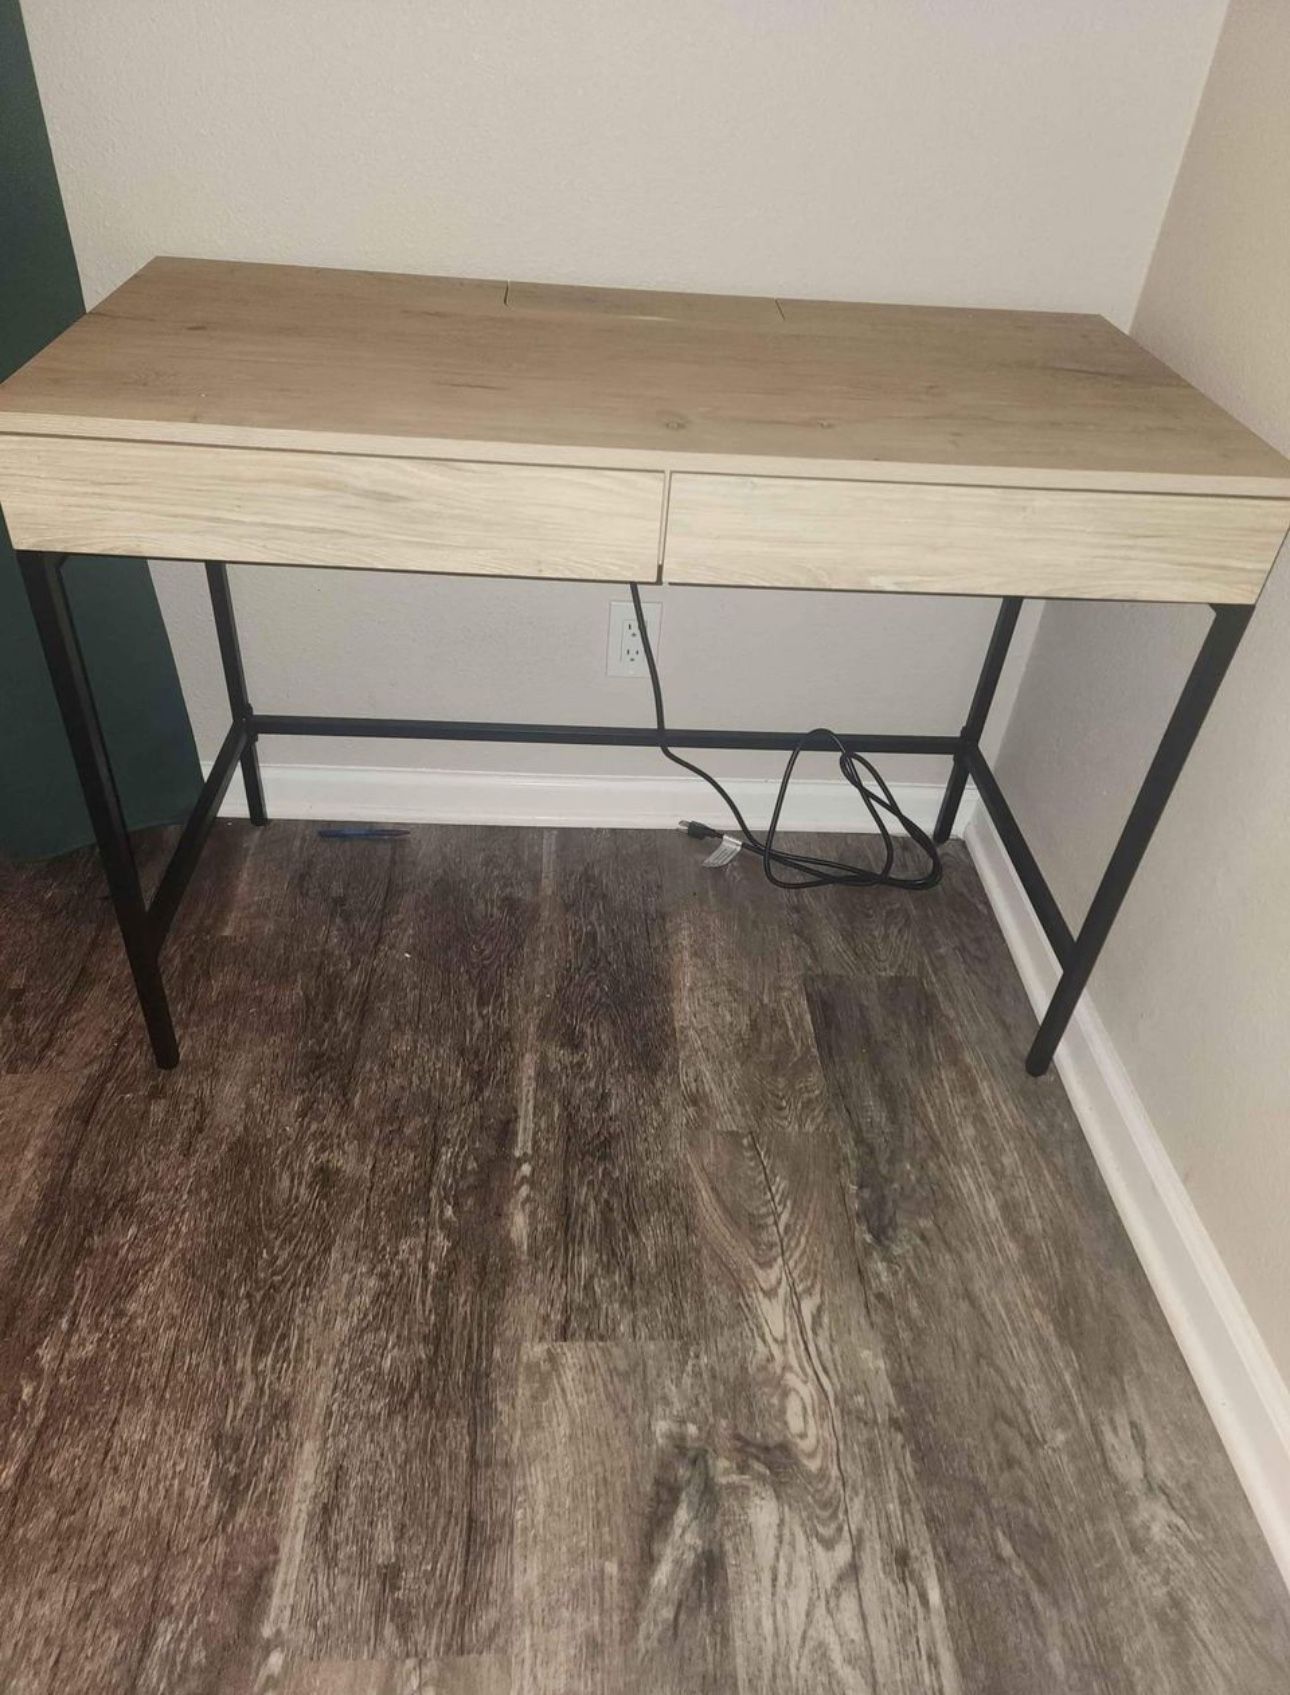 Tan desk vanity from target exallent new condition has plug 🔌 in ports 